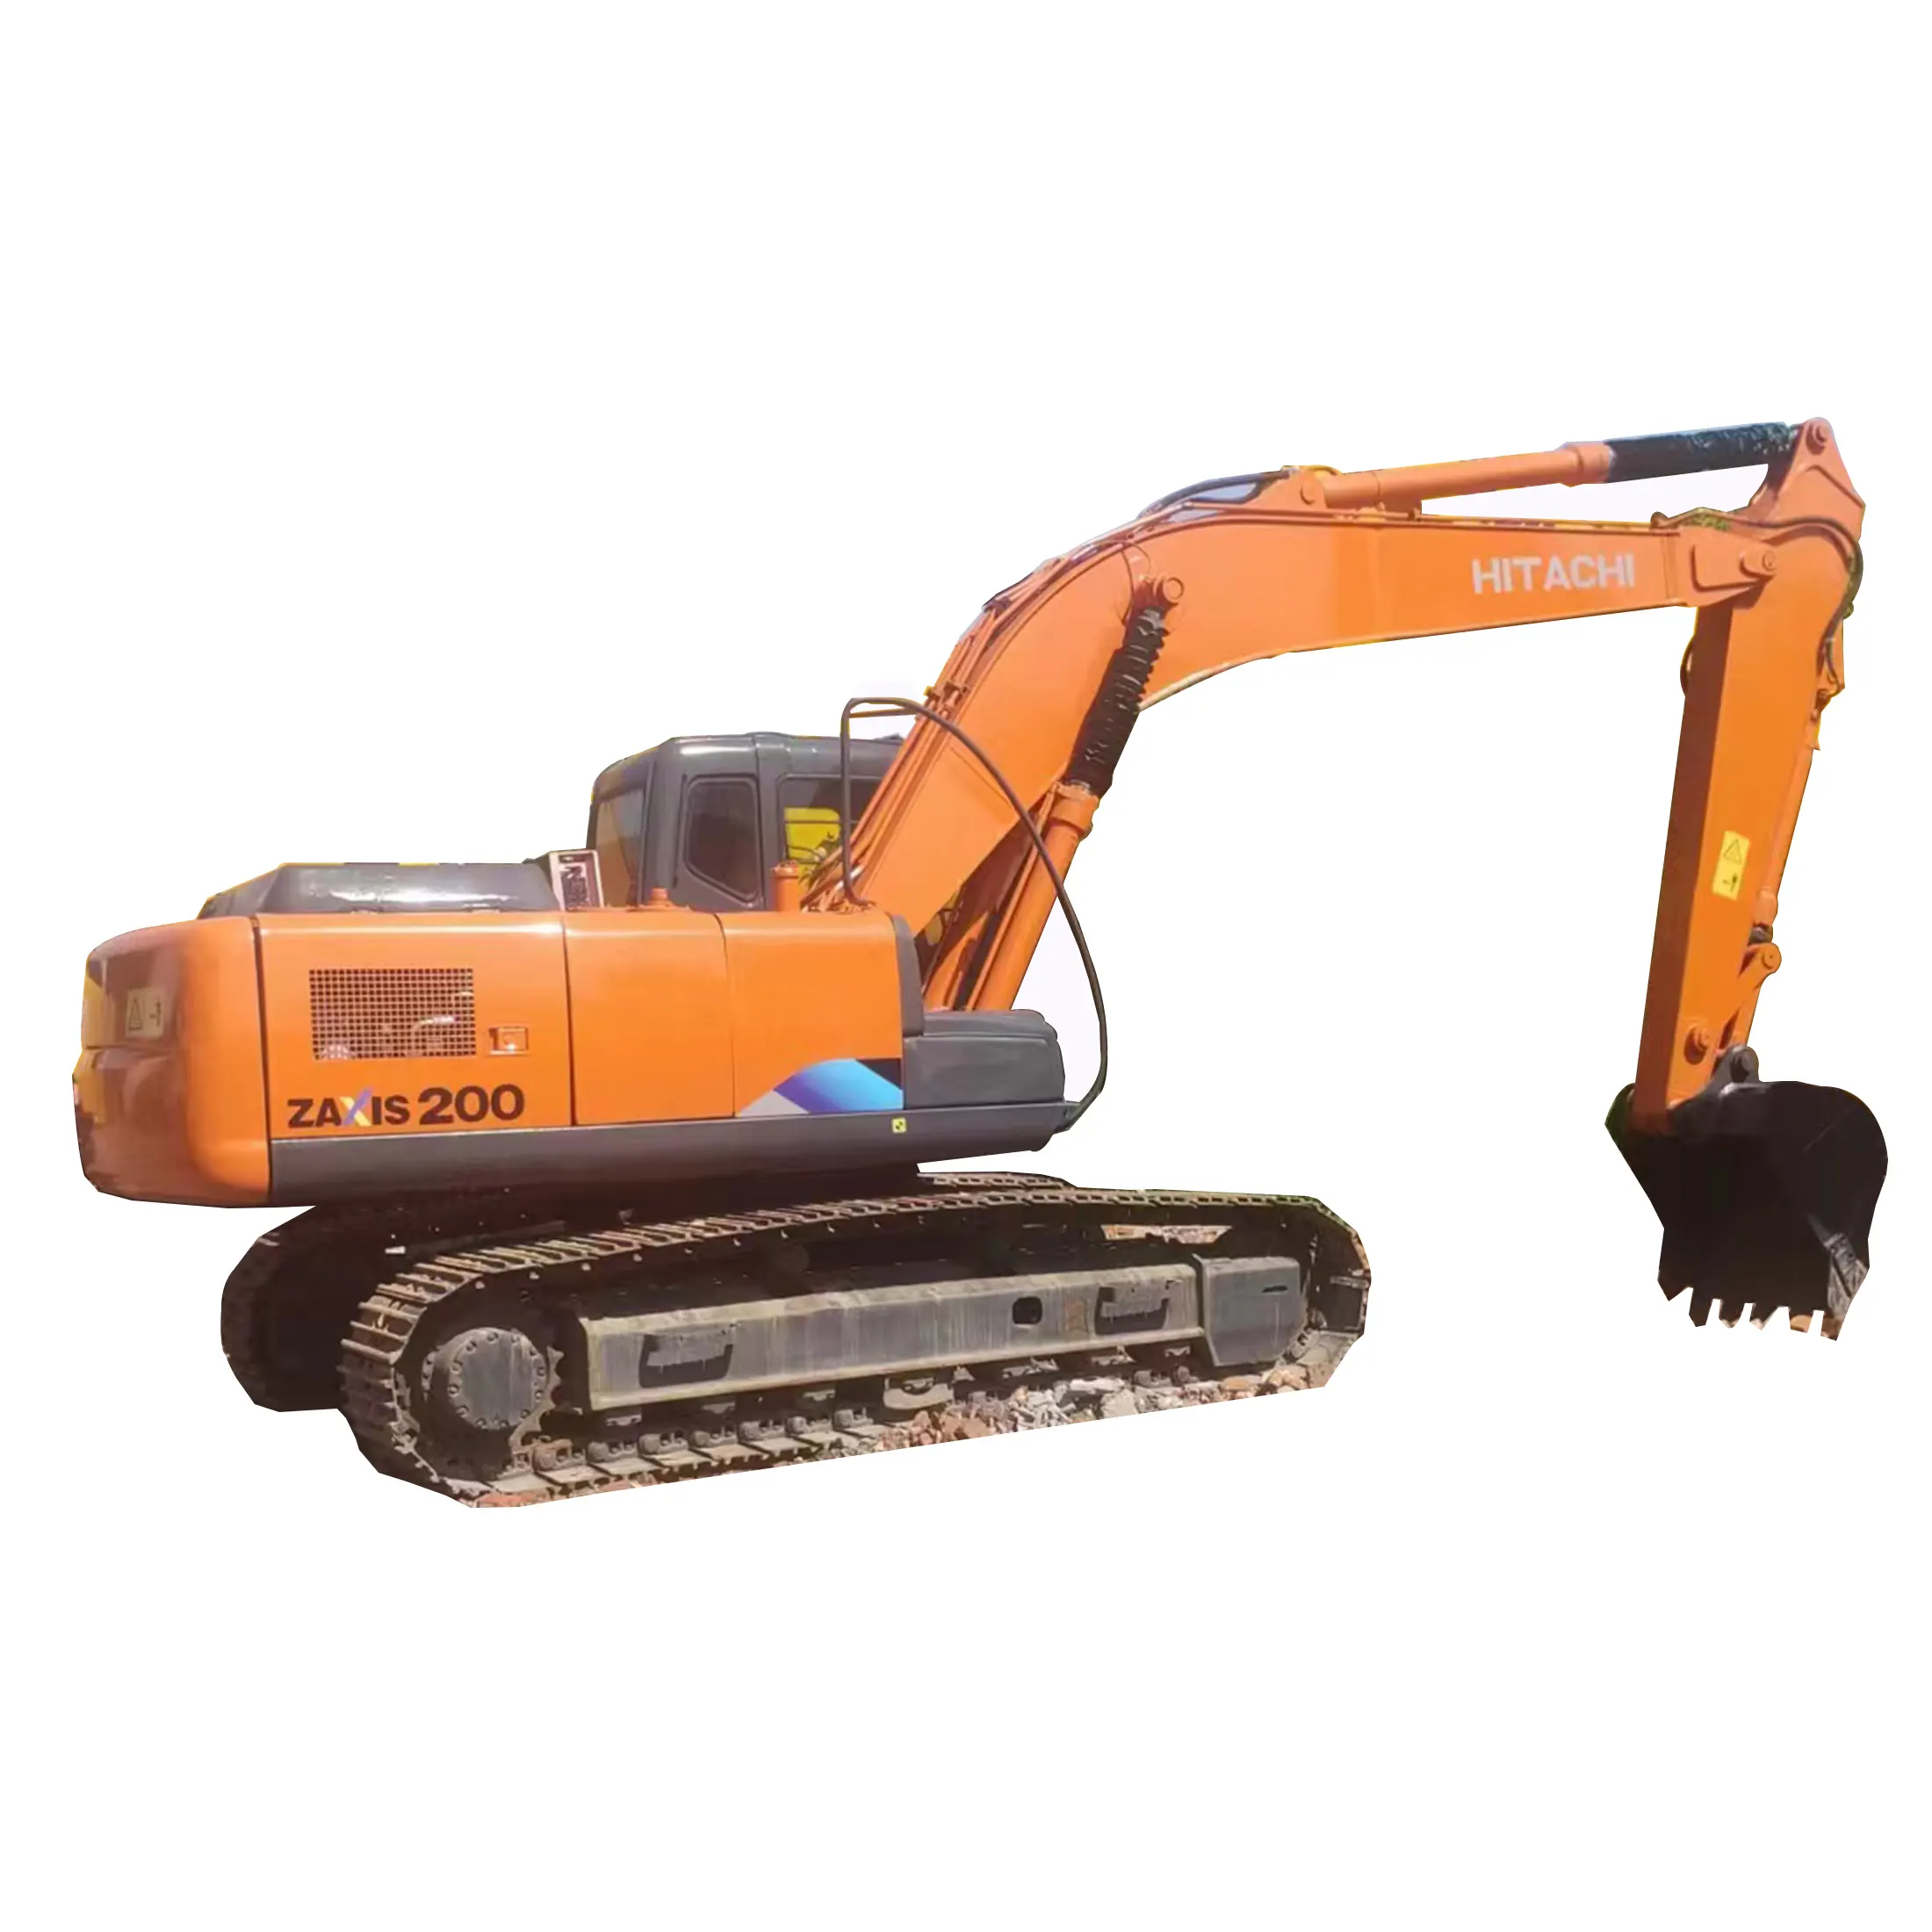 High quality unmodified second-hand excavator Hitachi ZAXIS 200 second-hand tracked excavator